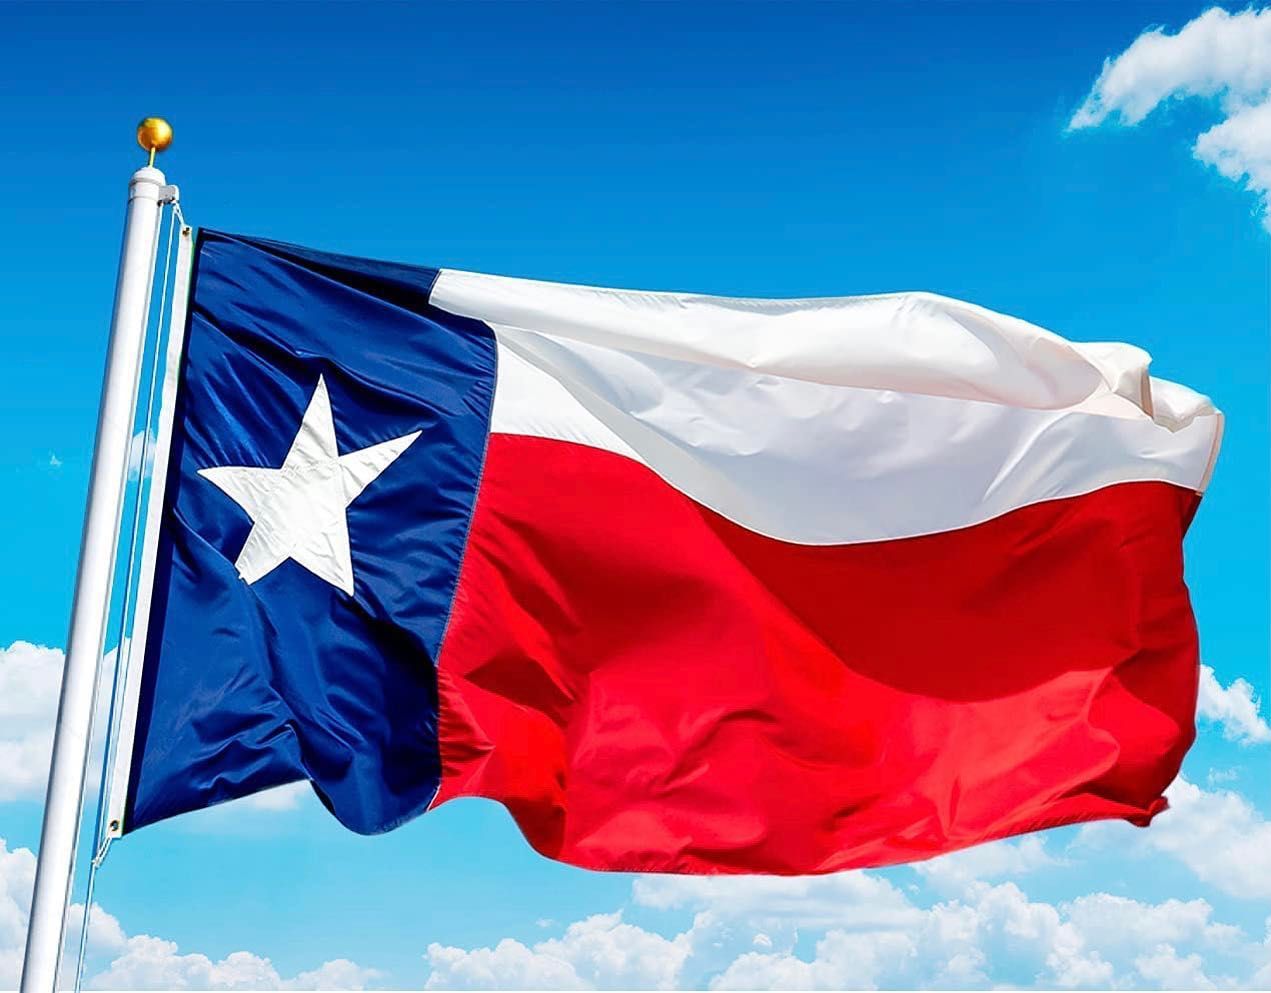 Texas - Greatest country in the world